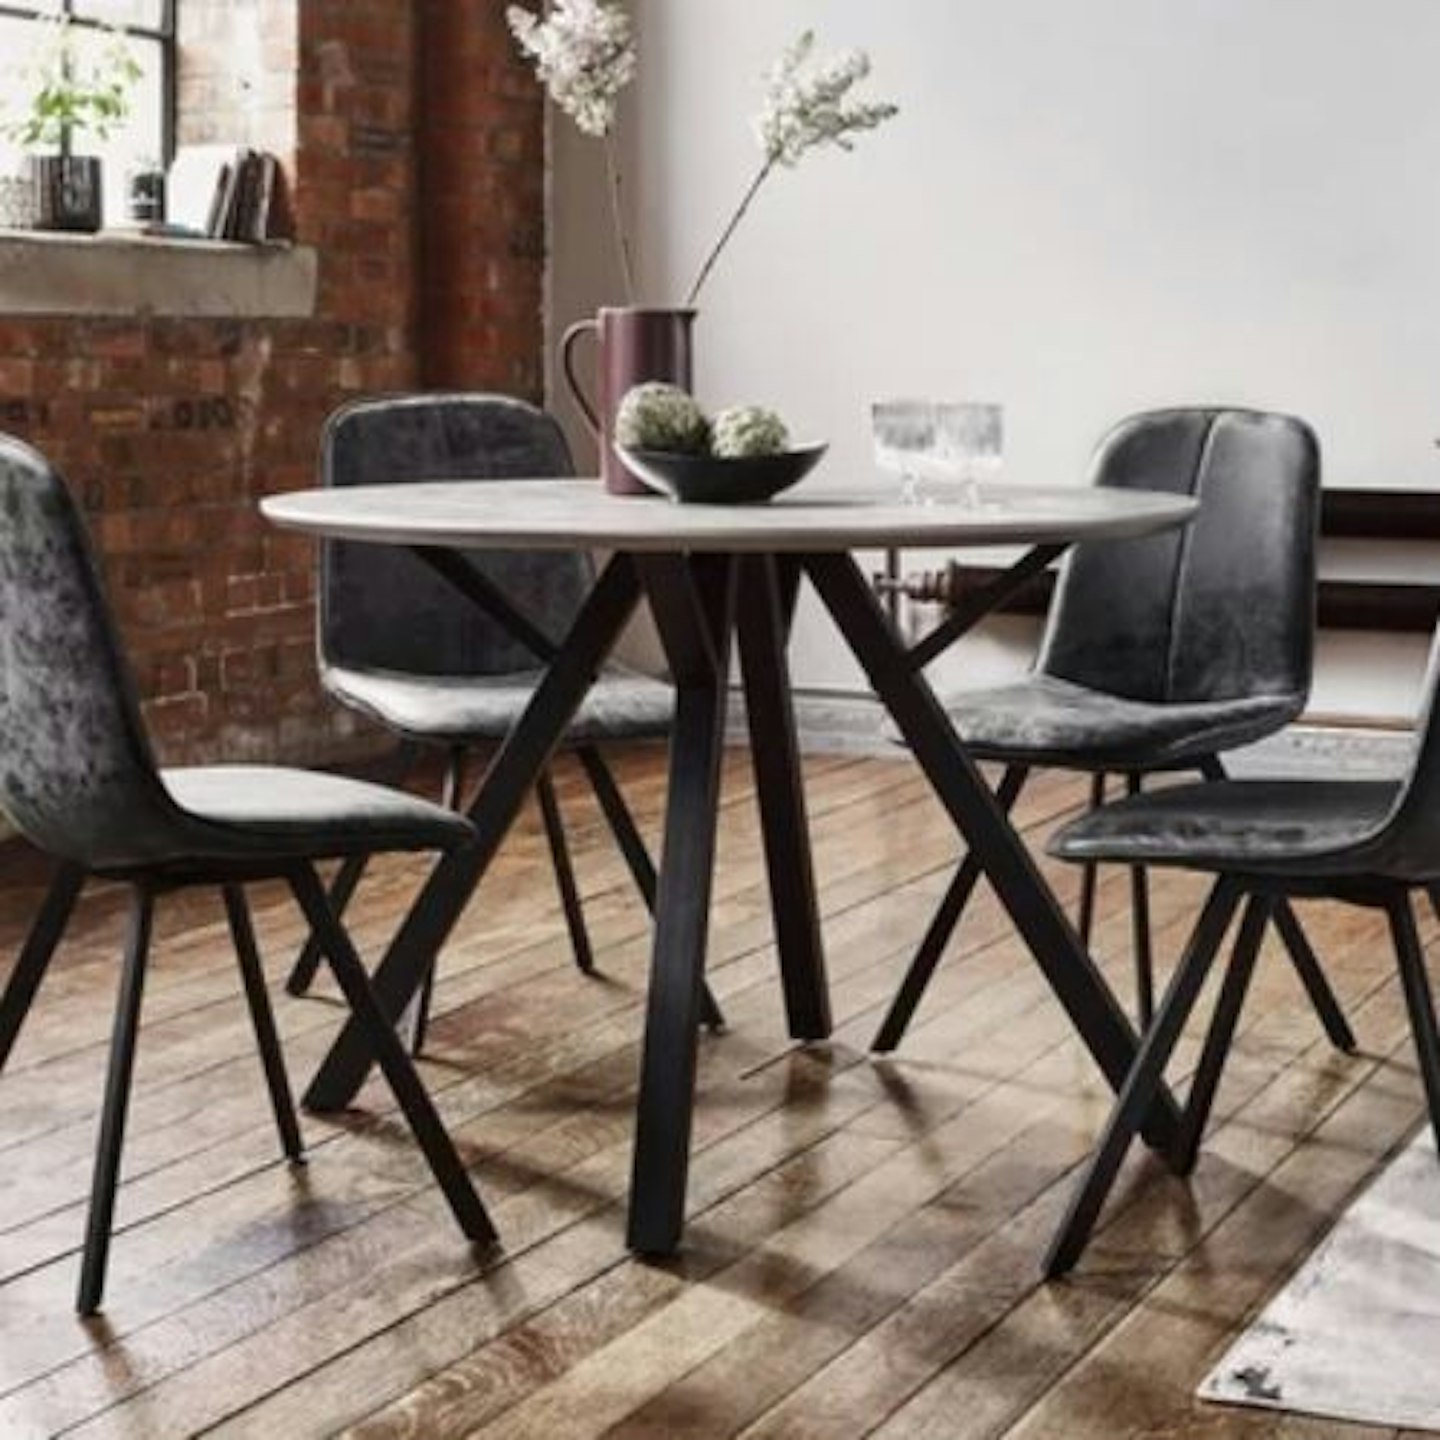 Diego Round Dining Table and 4 Dining Chairs